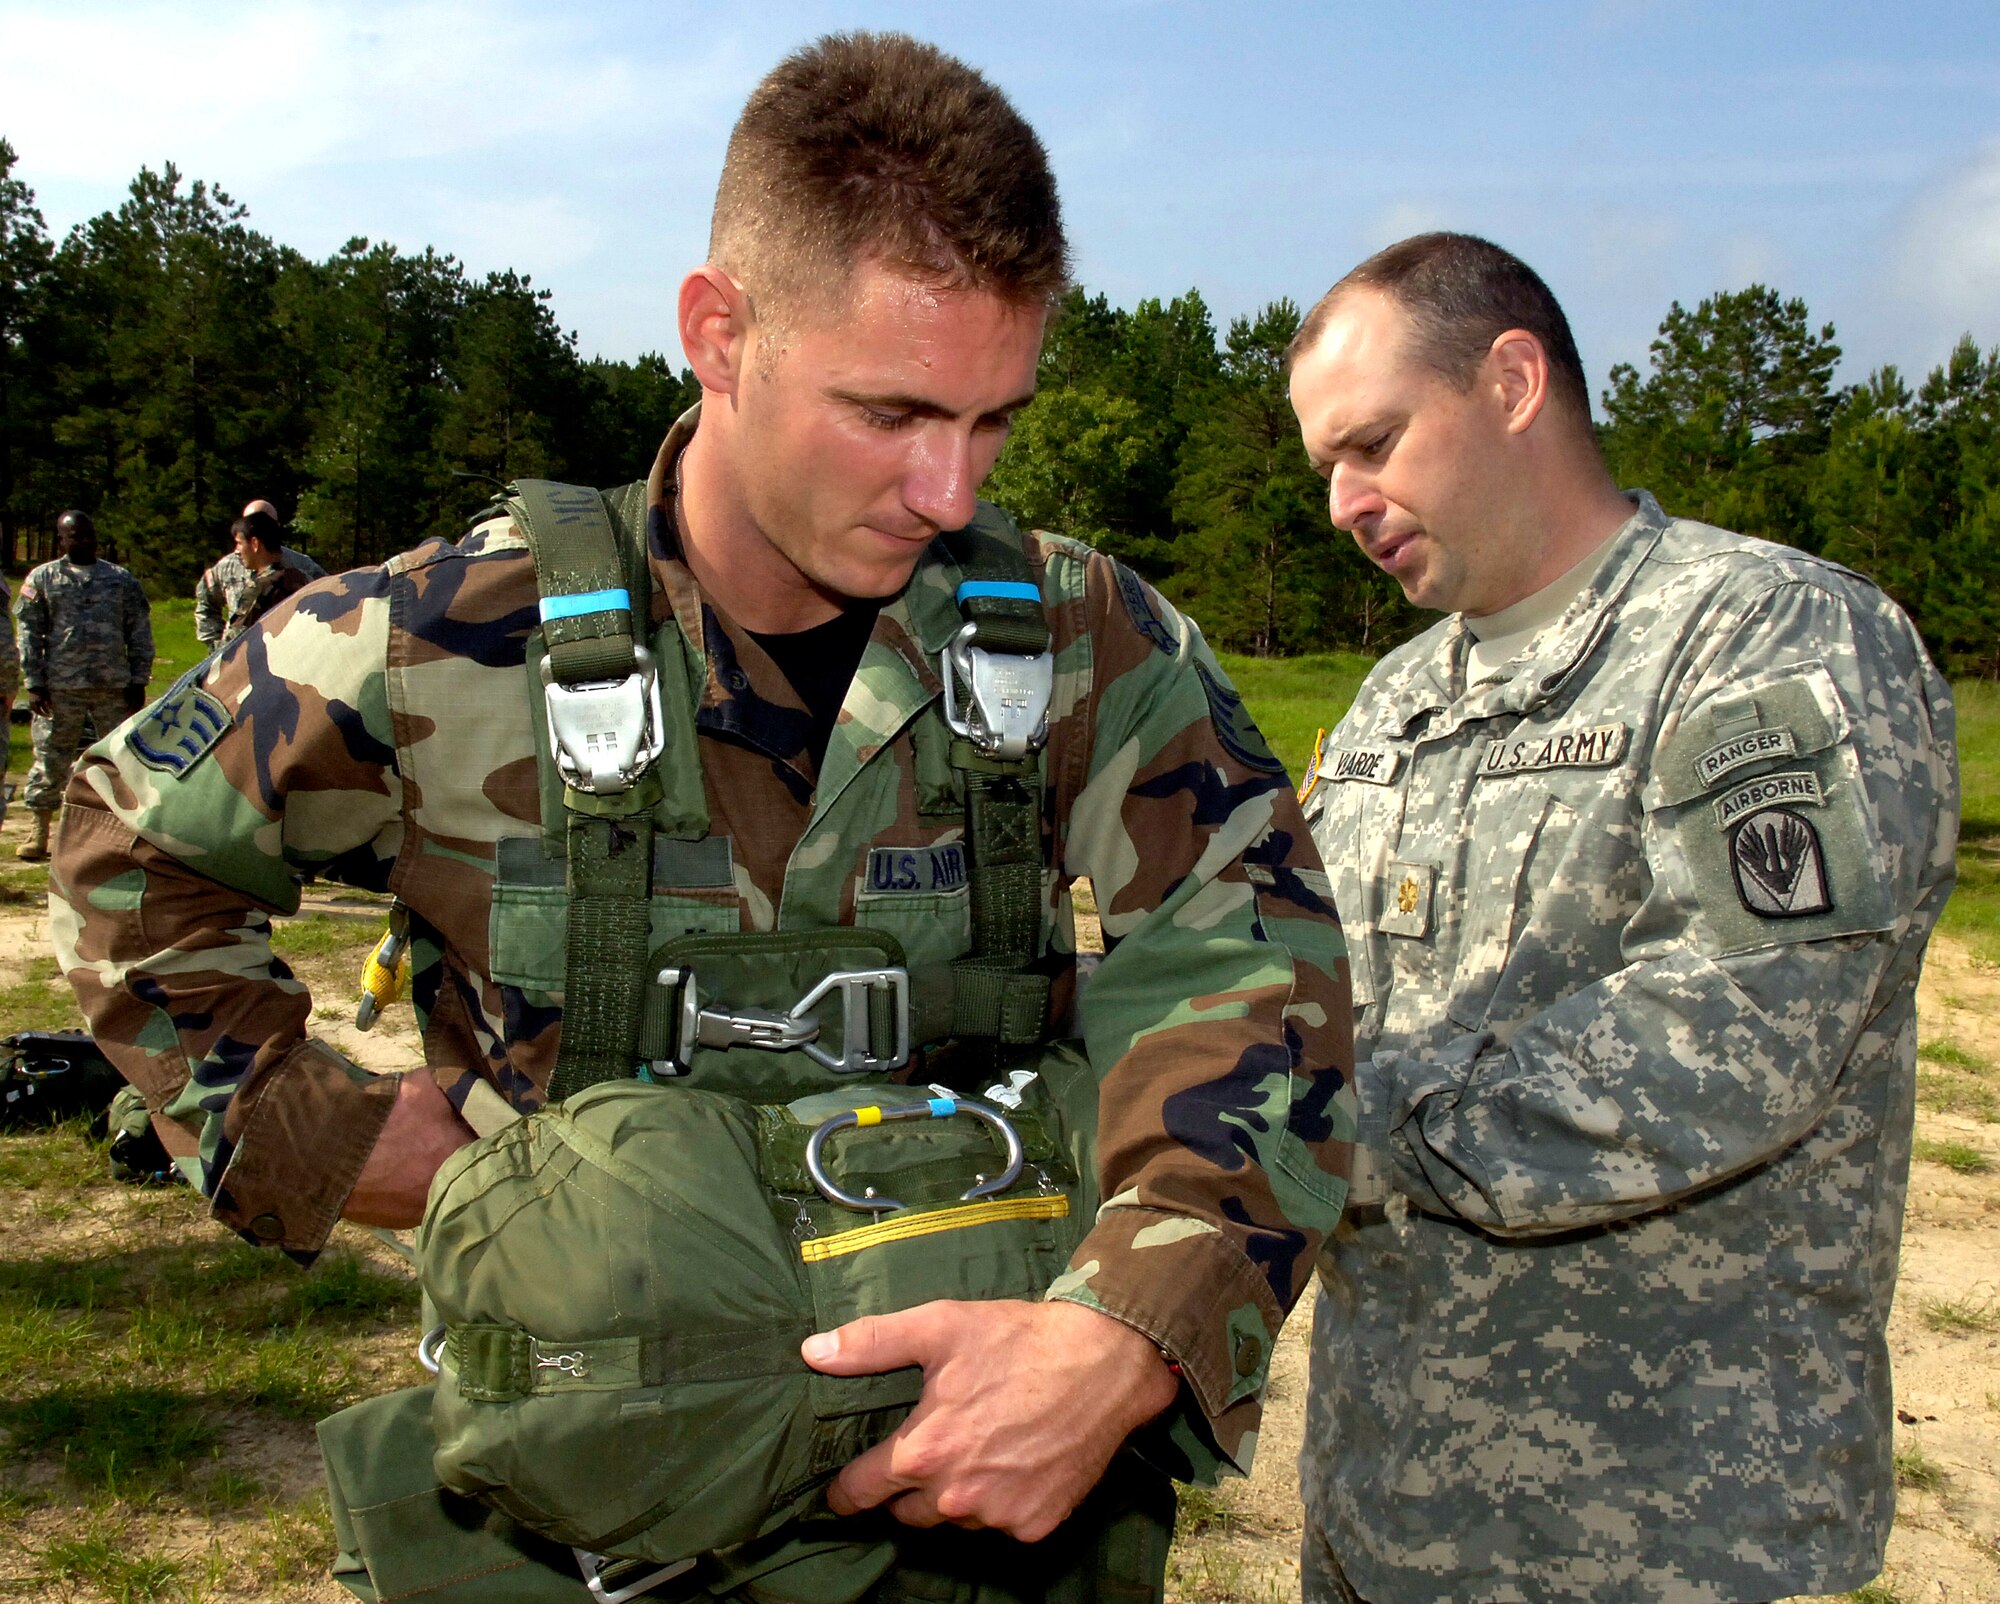 Staff Sgt. Reed (left) waits as Army Maj. Brian Velarde inspects his parachute at the Joint Readiness Training Center at Fort Polk, La., on Wednesday, May 3, 2006. Sergeant Reed, a survival, evasion, resistance and escape specialist, jumped with Soldiers in special operations training to complete static-line parachute training. (U.S. Air Force photo/Senior Airman Stephen J. Otero)